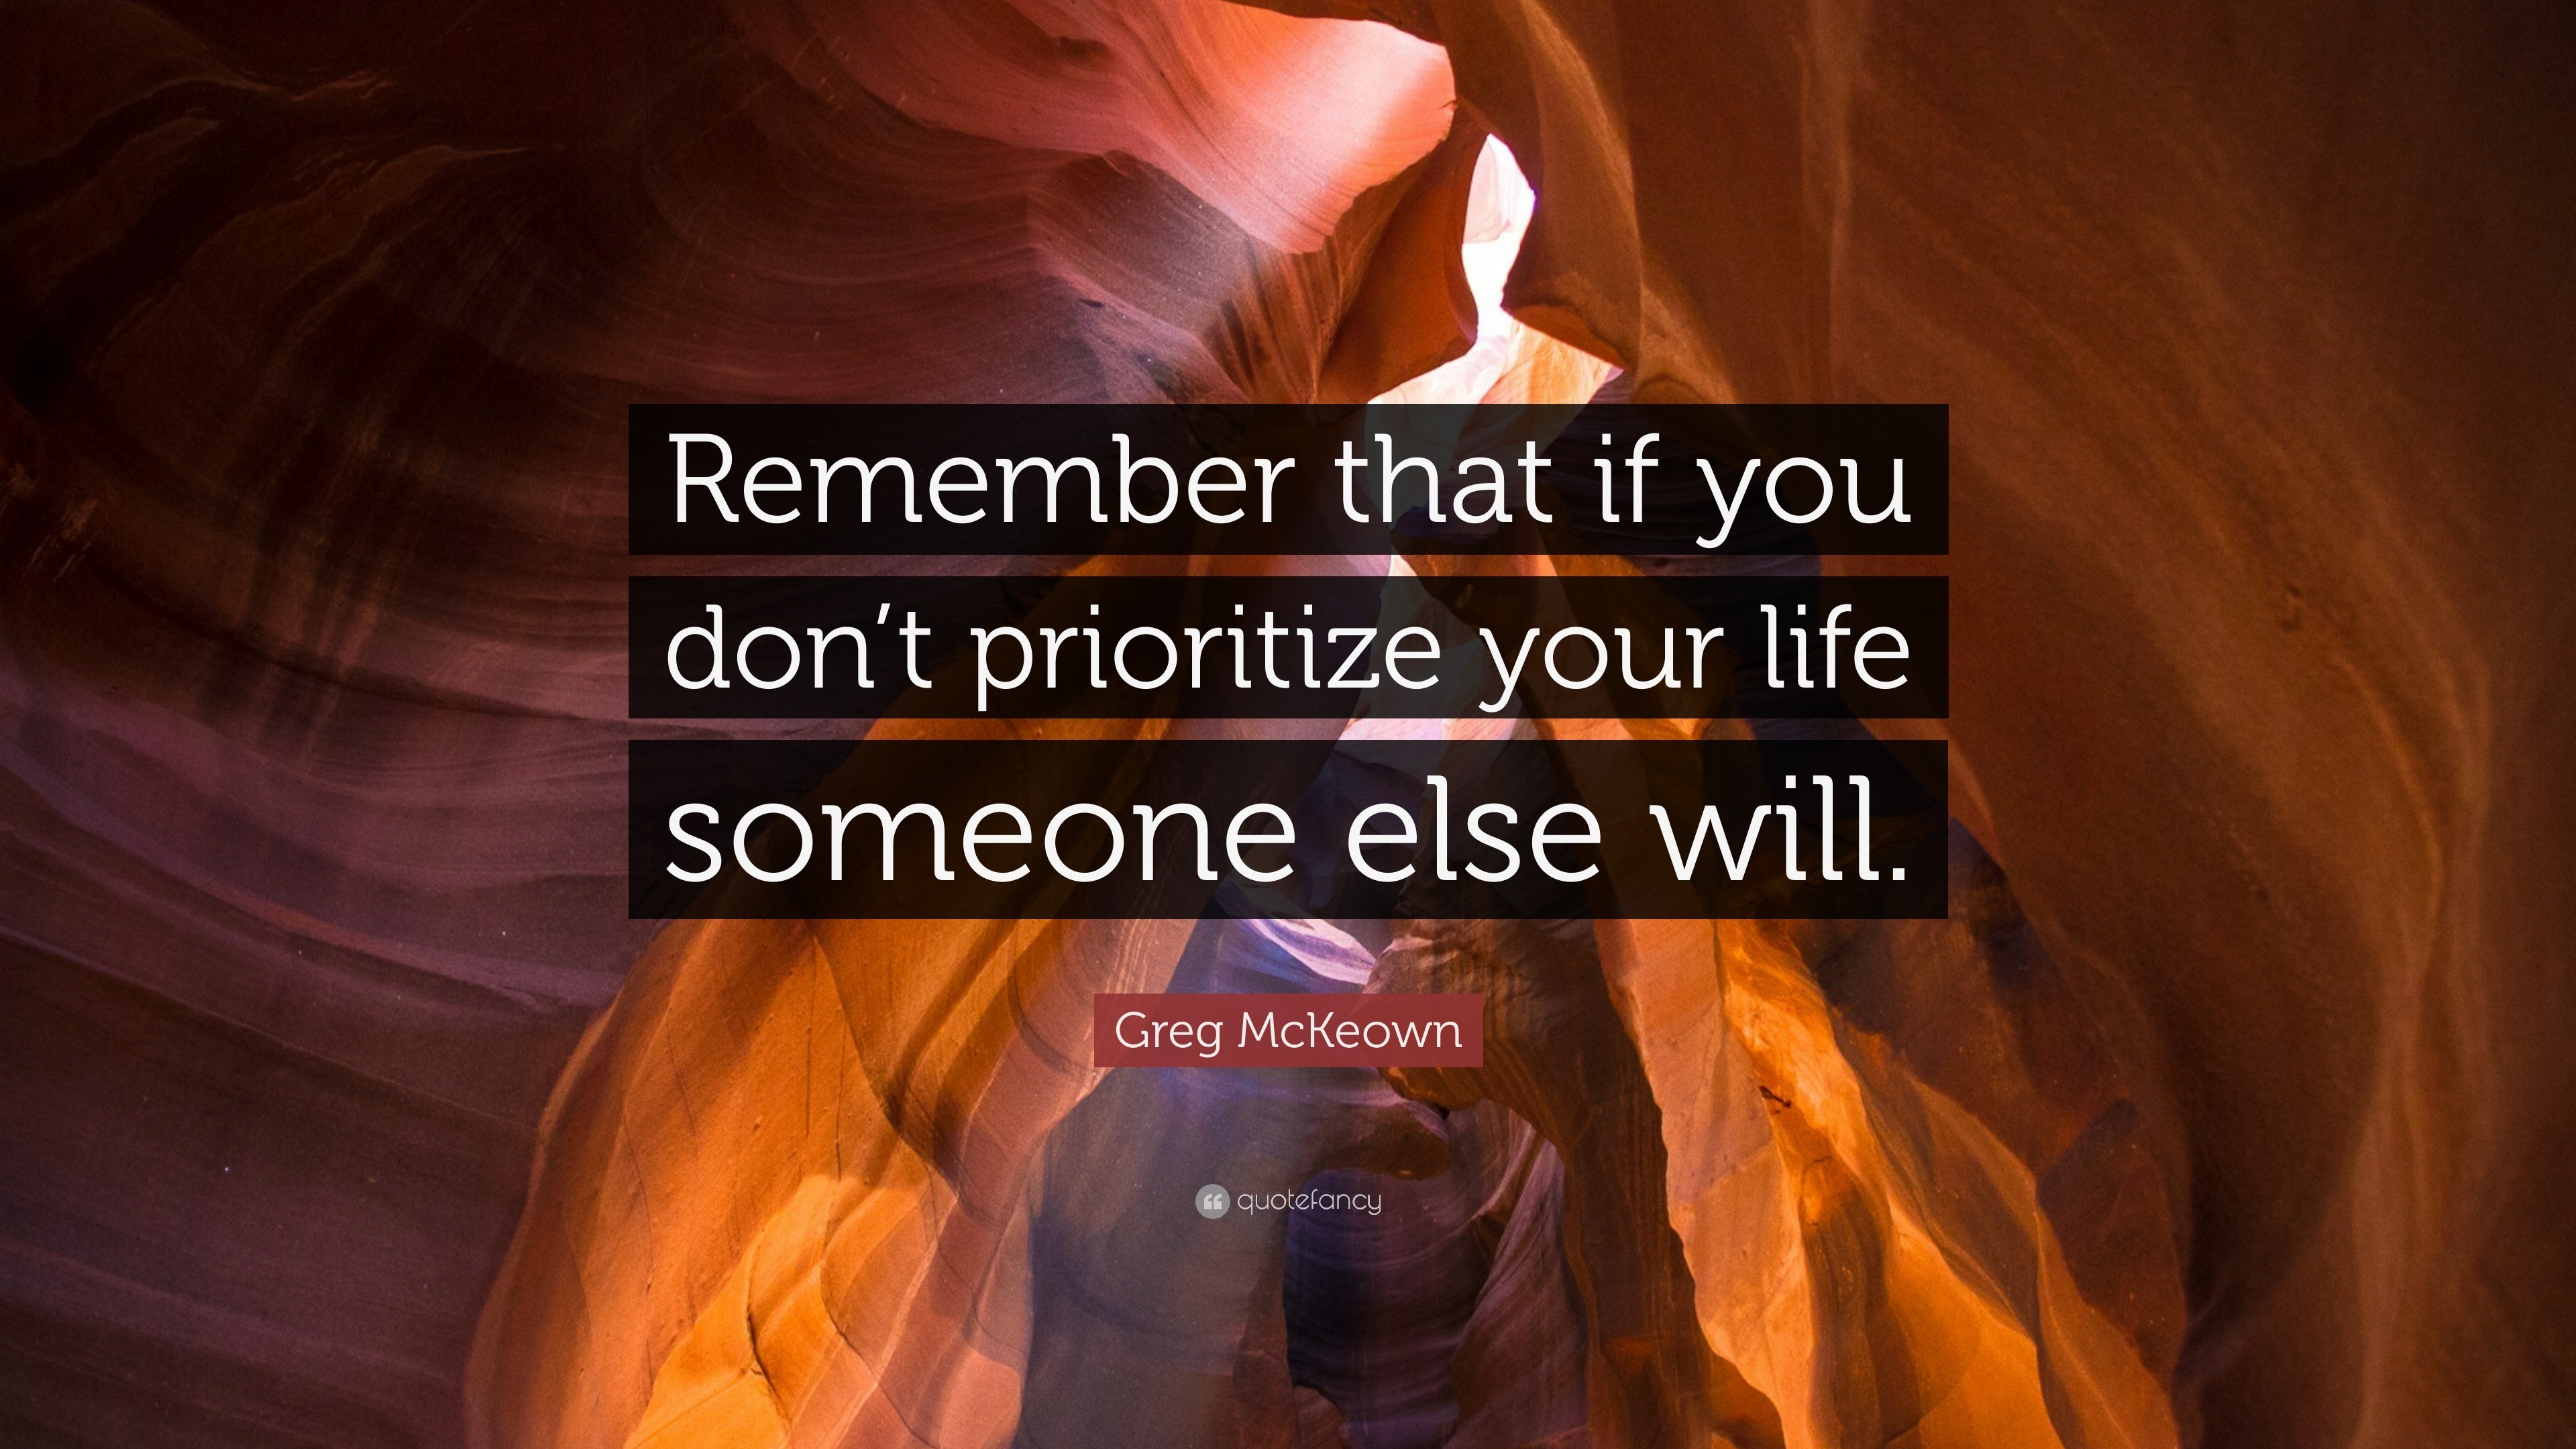 If you don't prioritize your life, someone else will: Notebook  Motivational, Inspirational Composition, Notebook With Inspirational  Quotes, 107